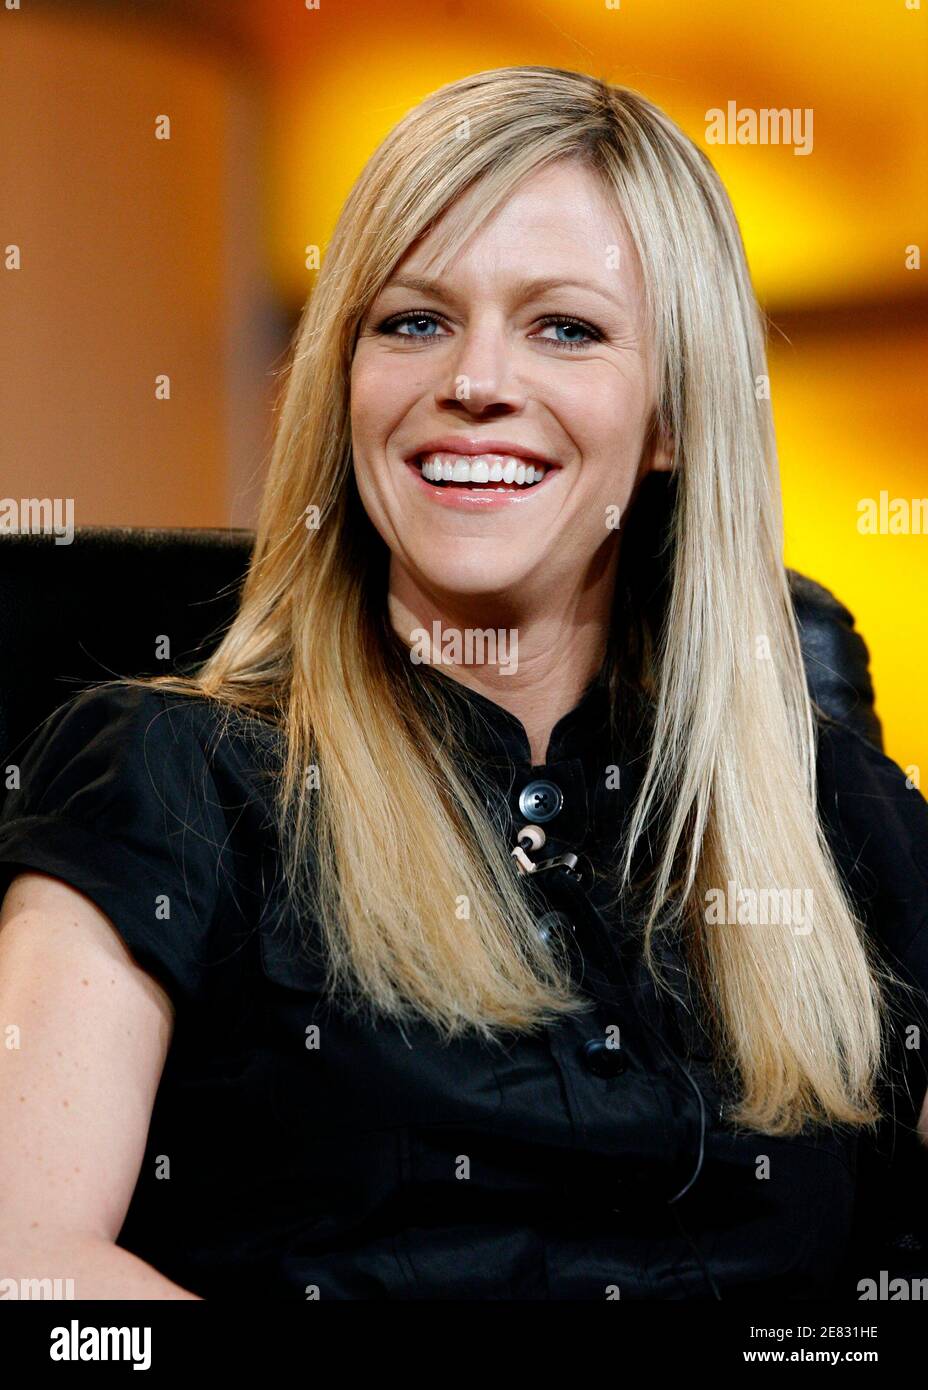 Actress Kaitlin Olson answers a question during a panel discussion at the Television Critics Association press tour in Pasadena January 9, 2007.  REUTERS/Gus Ruelas (UNITED STATES) Stock Photo